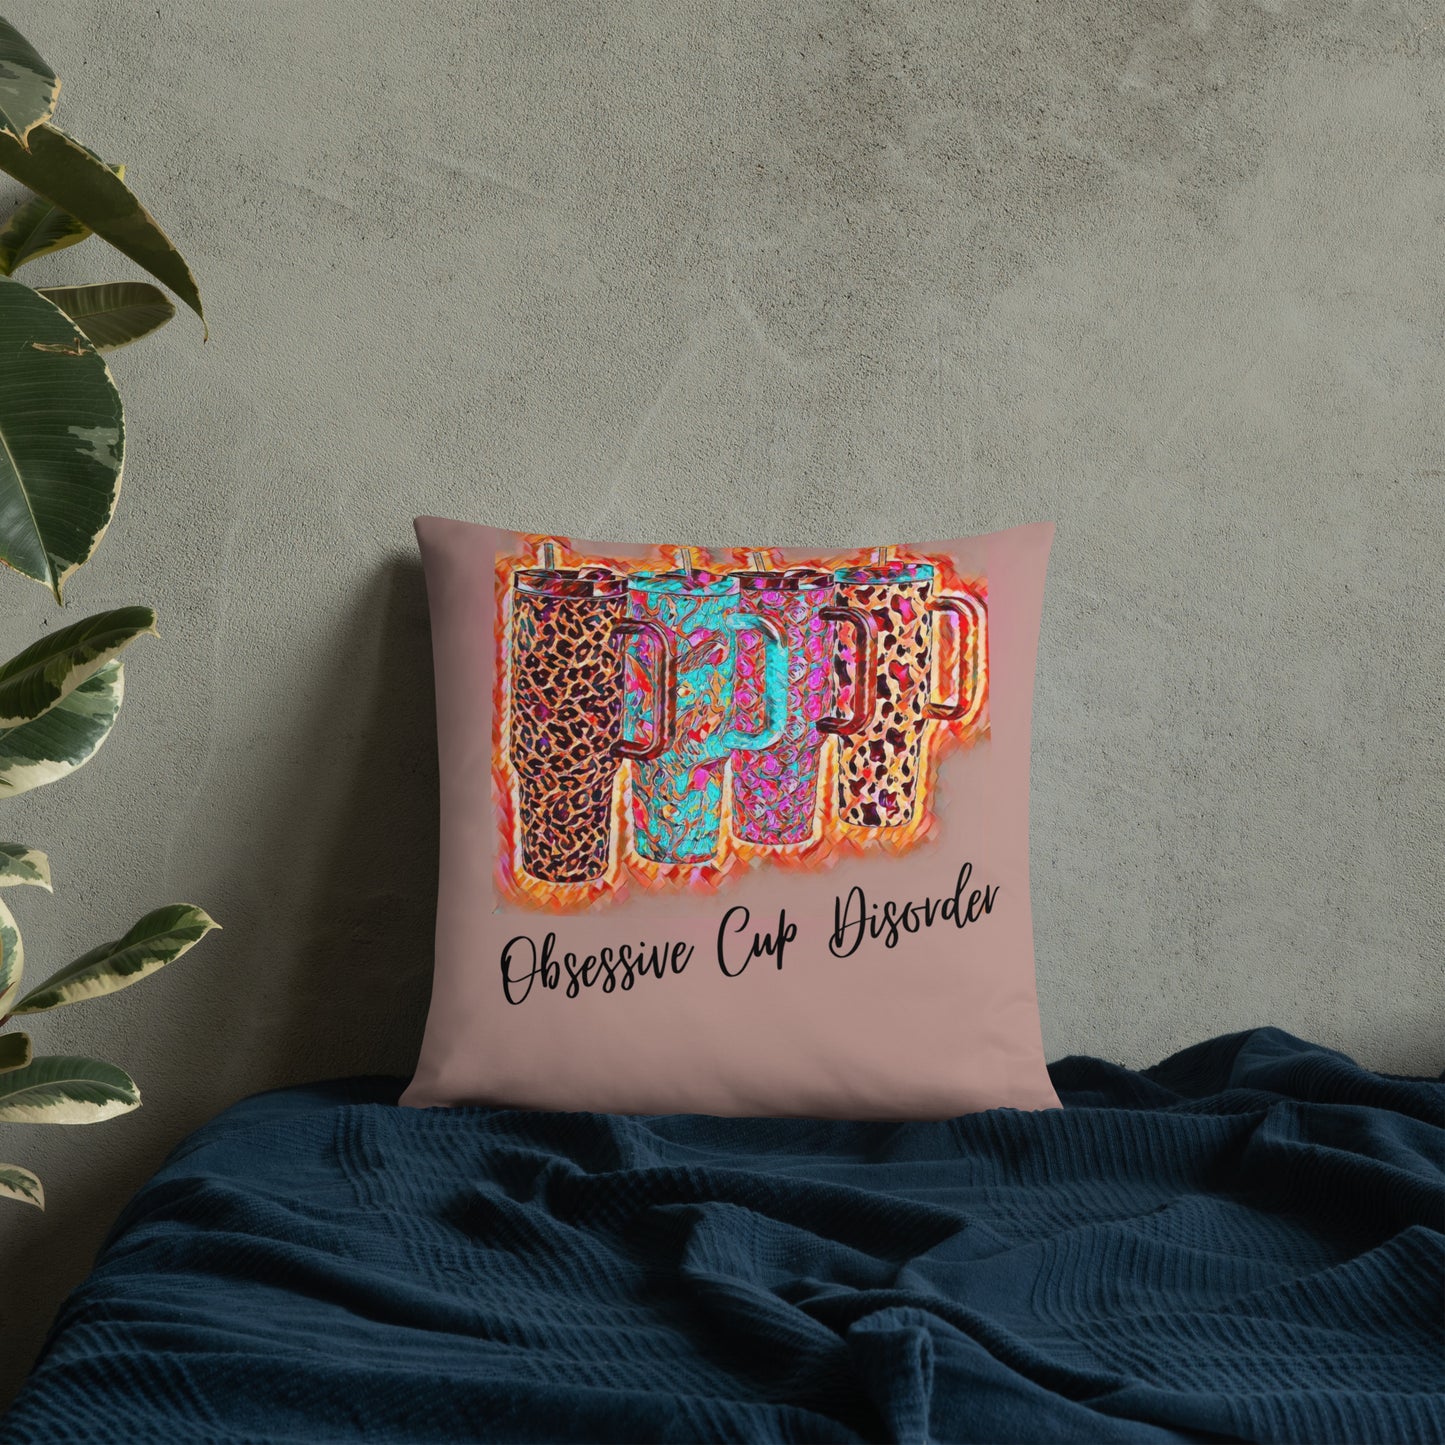 Obsessive Cup Disorder Double Sided Throw Pillow 18” x 18”